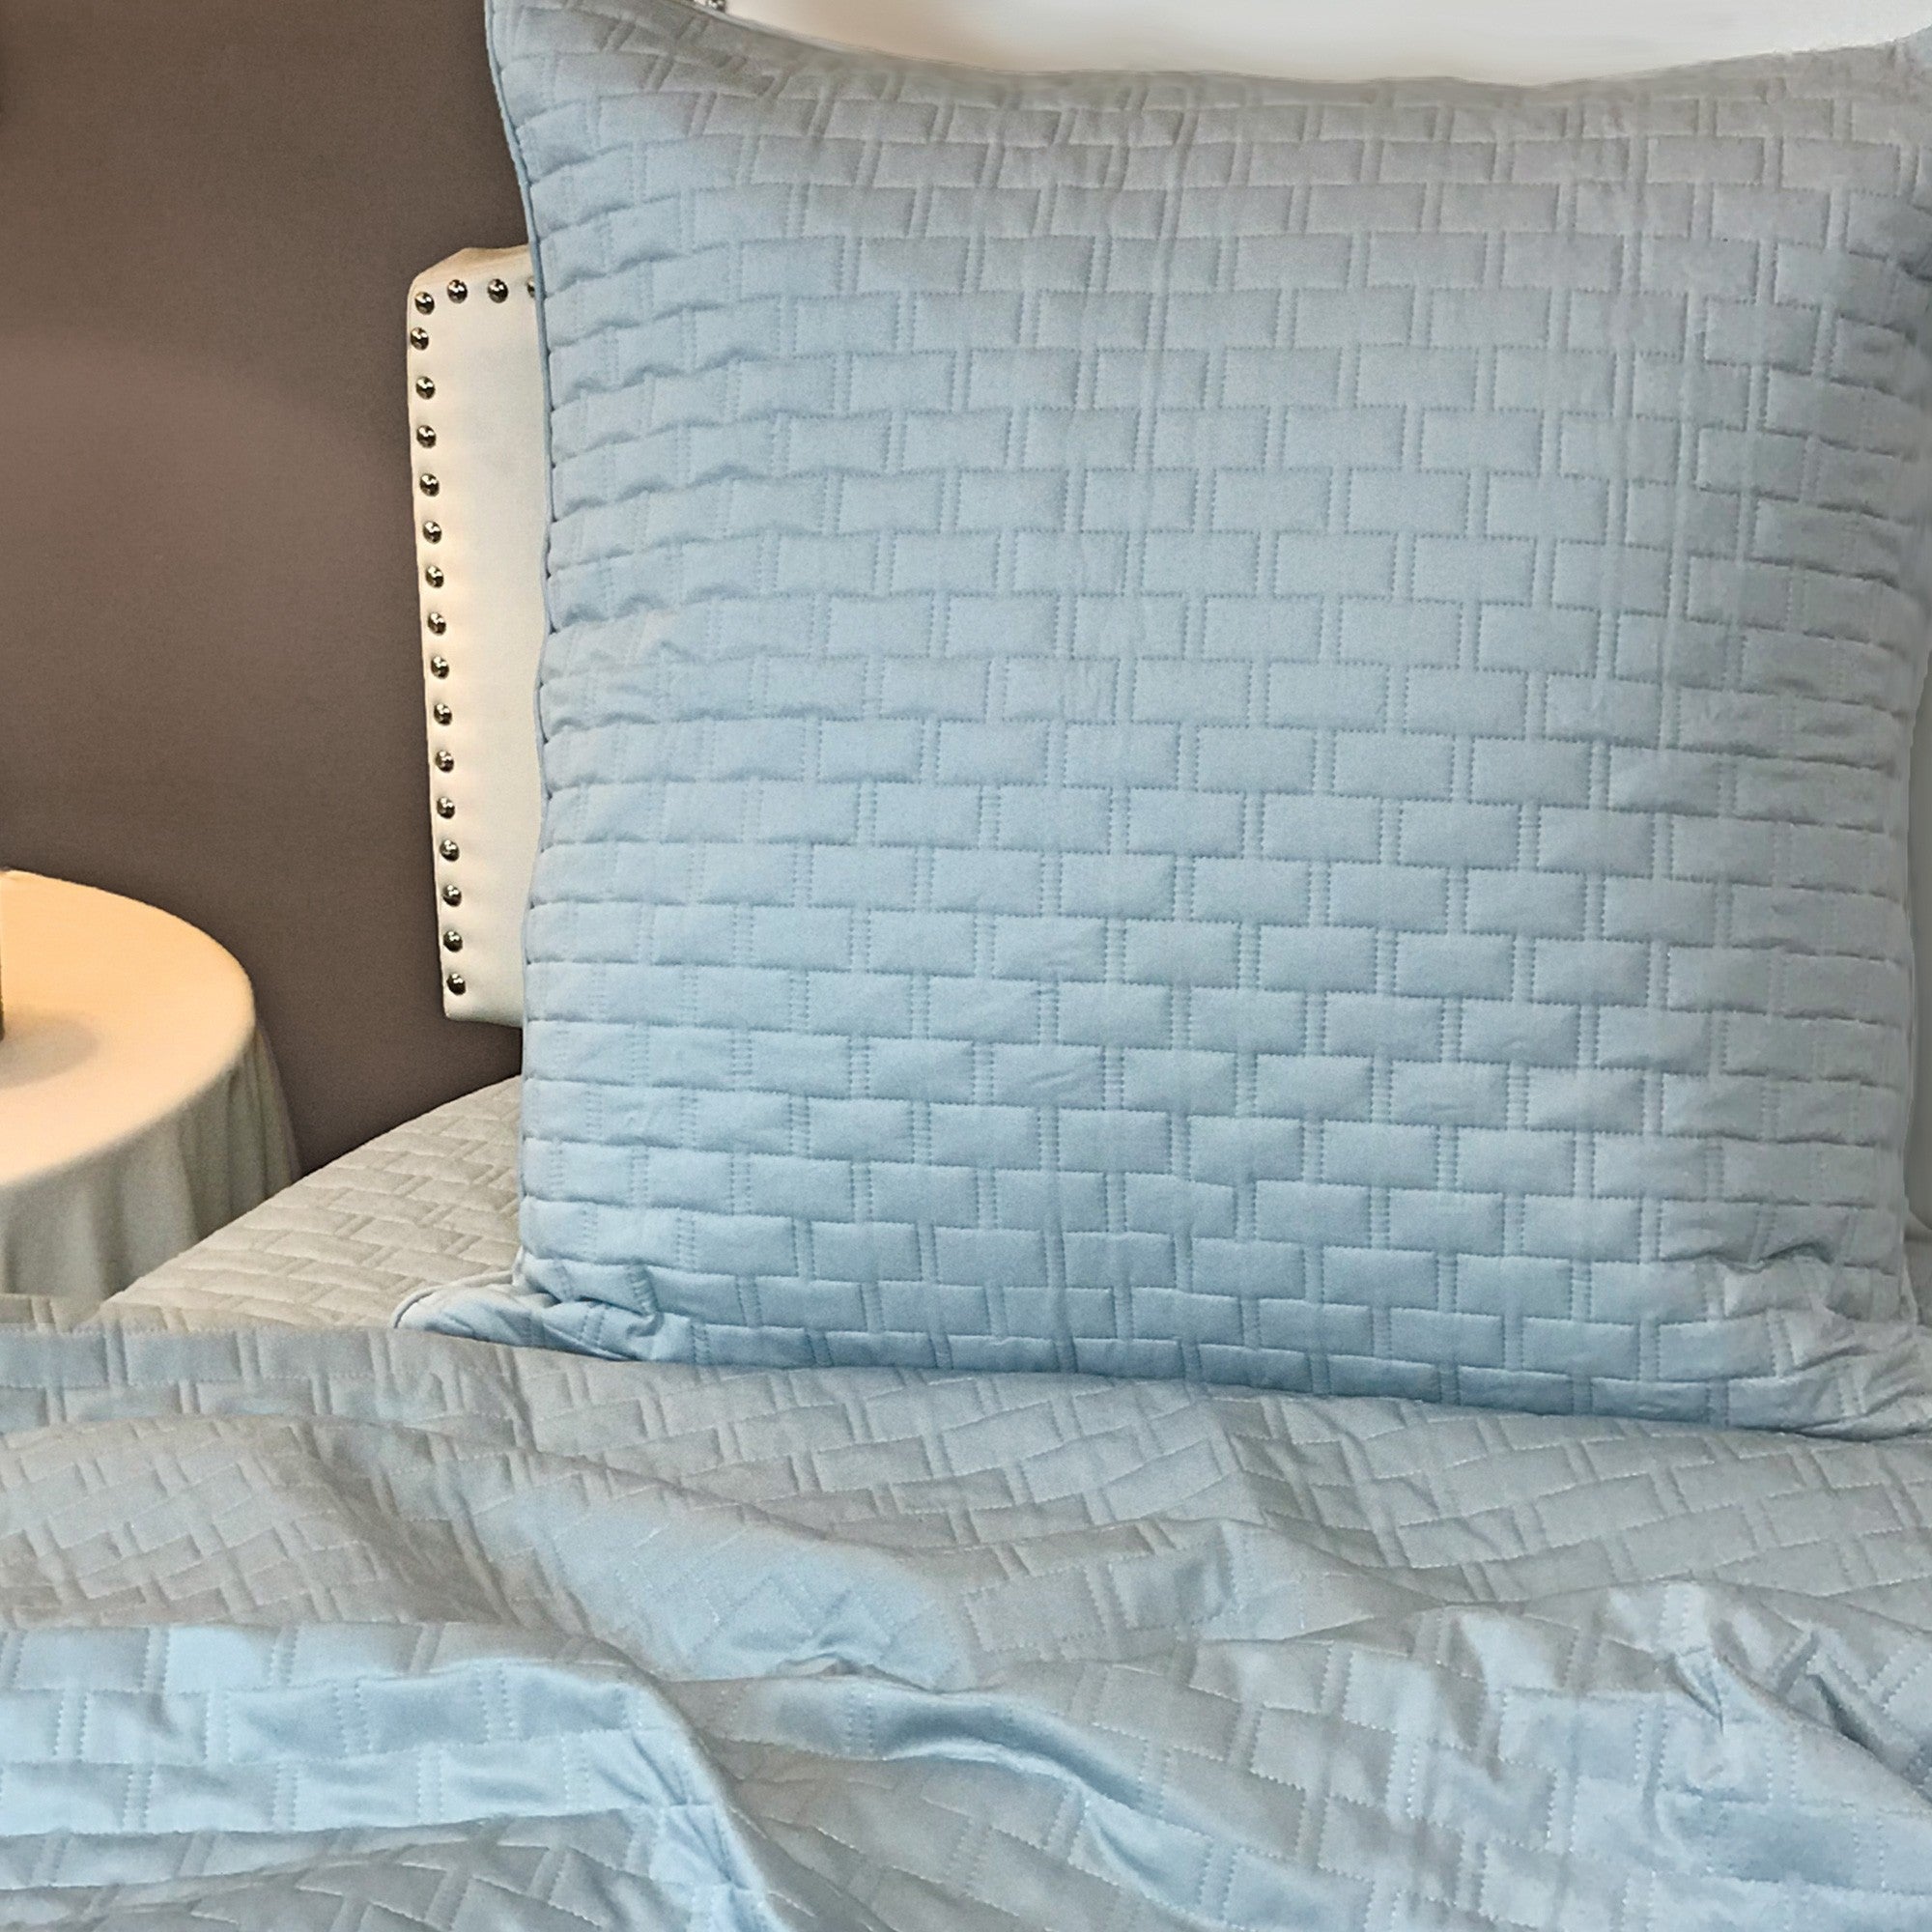 100% BAMBOO Quilted Euro Sham - Piped Edges, Brick Pattern Quilting, Incredibly Soft and Hypoallergenic Pillowcases - Sky